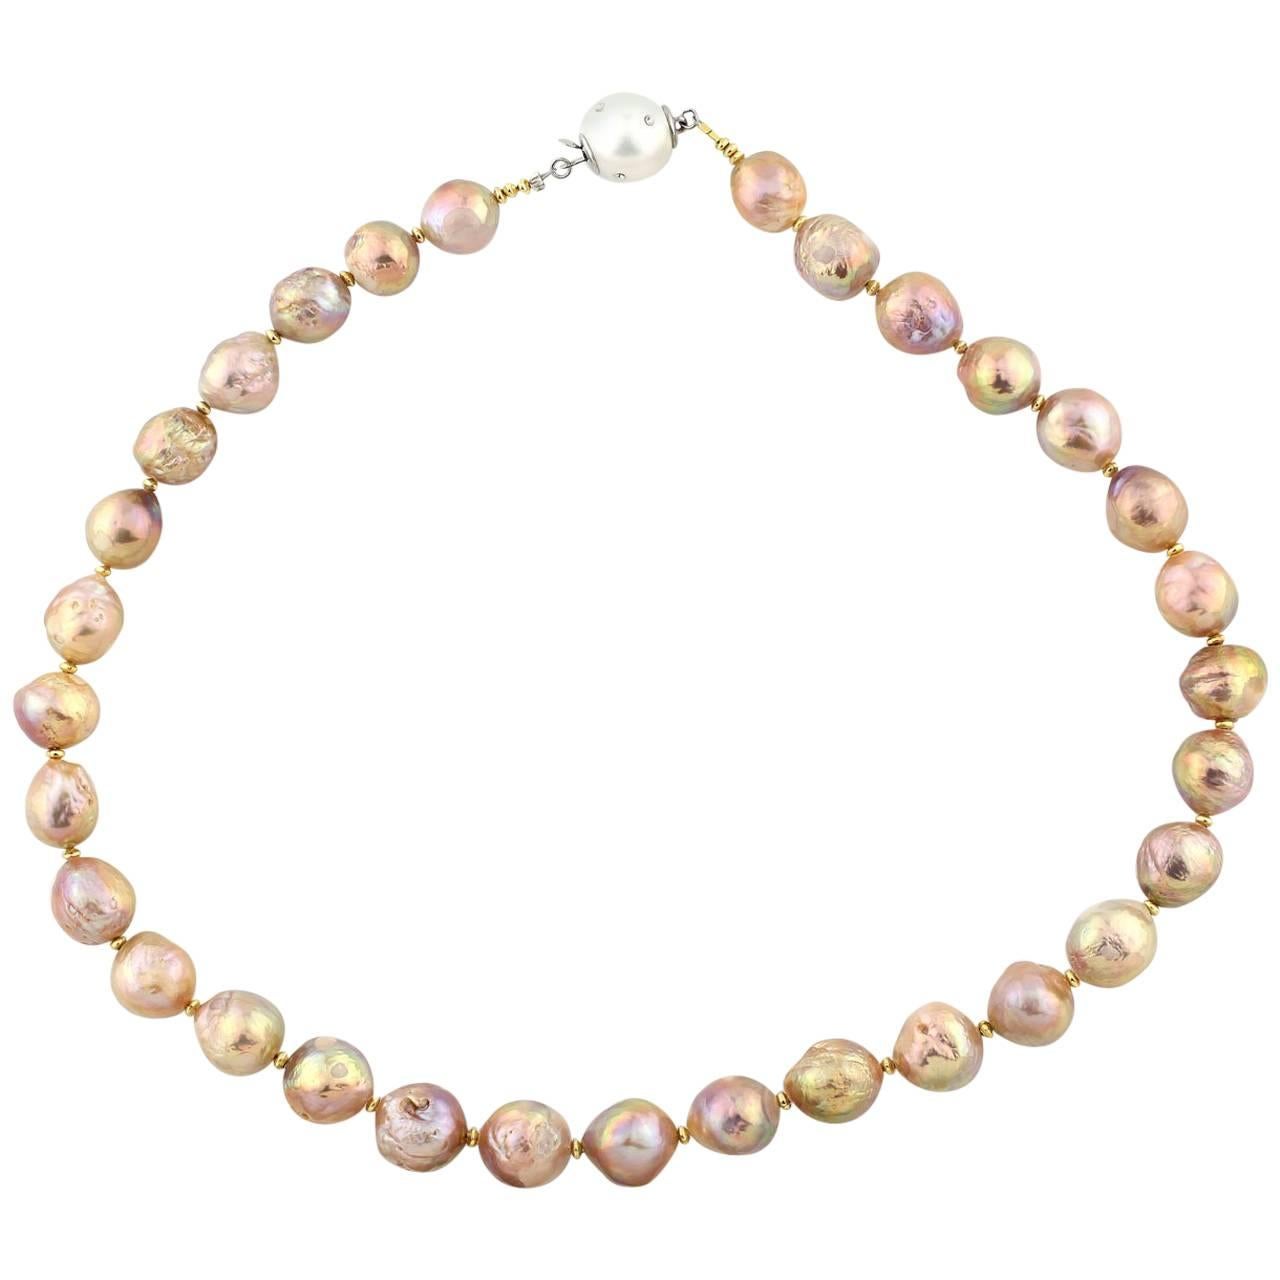 AJD Exquisite Magnificent Classic Hand Knotted PinkyGoldy Wrinkle Pearl Necklace